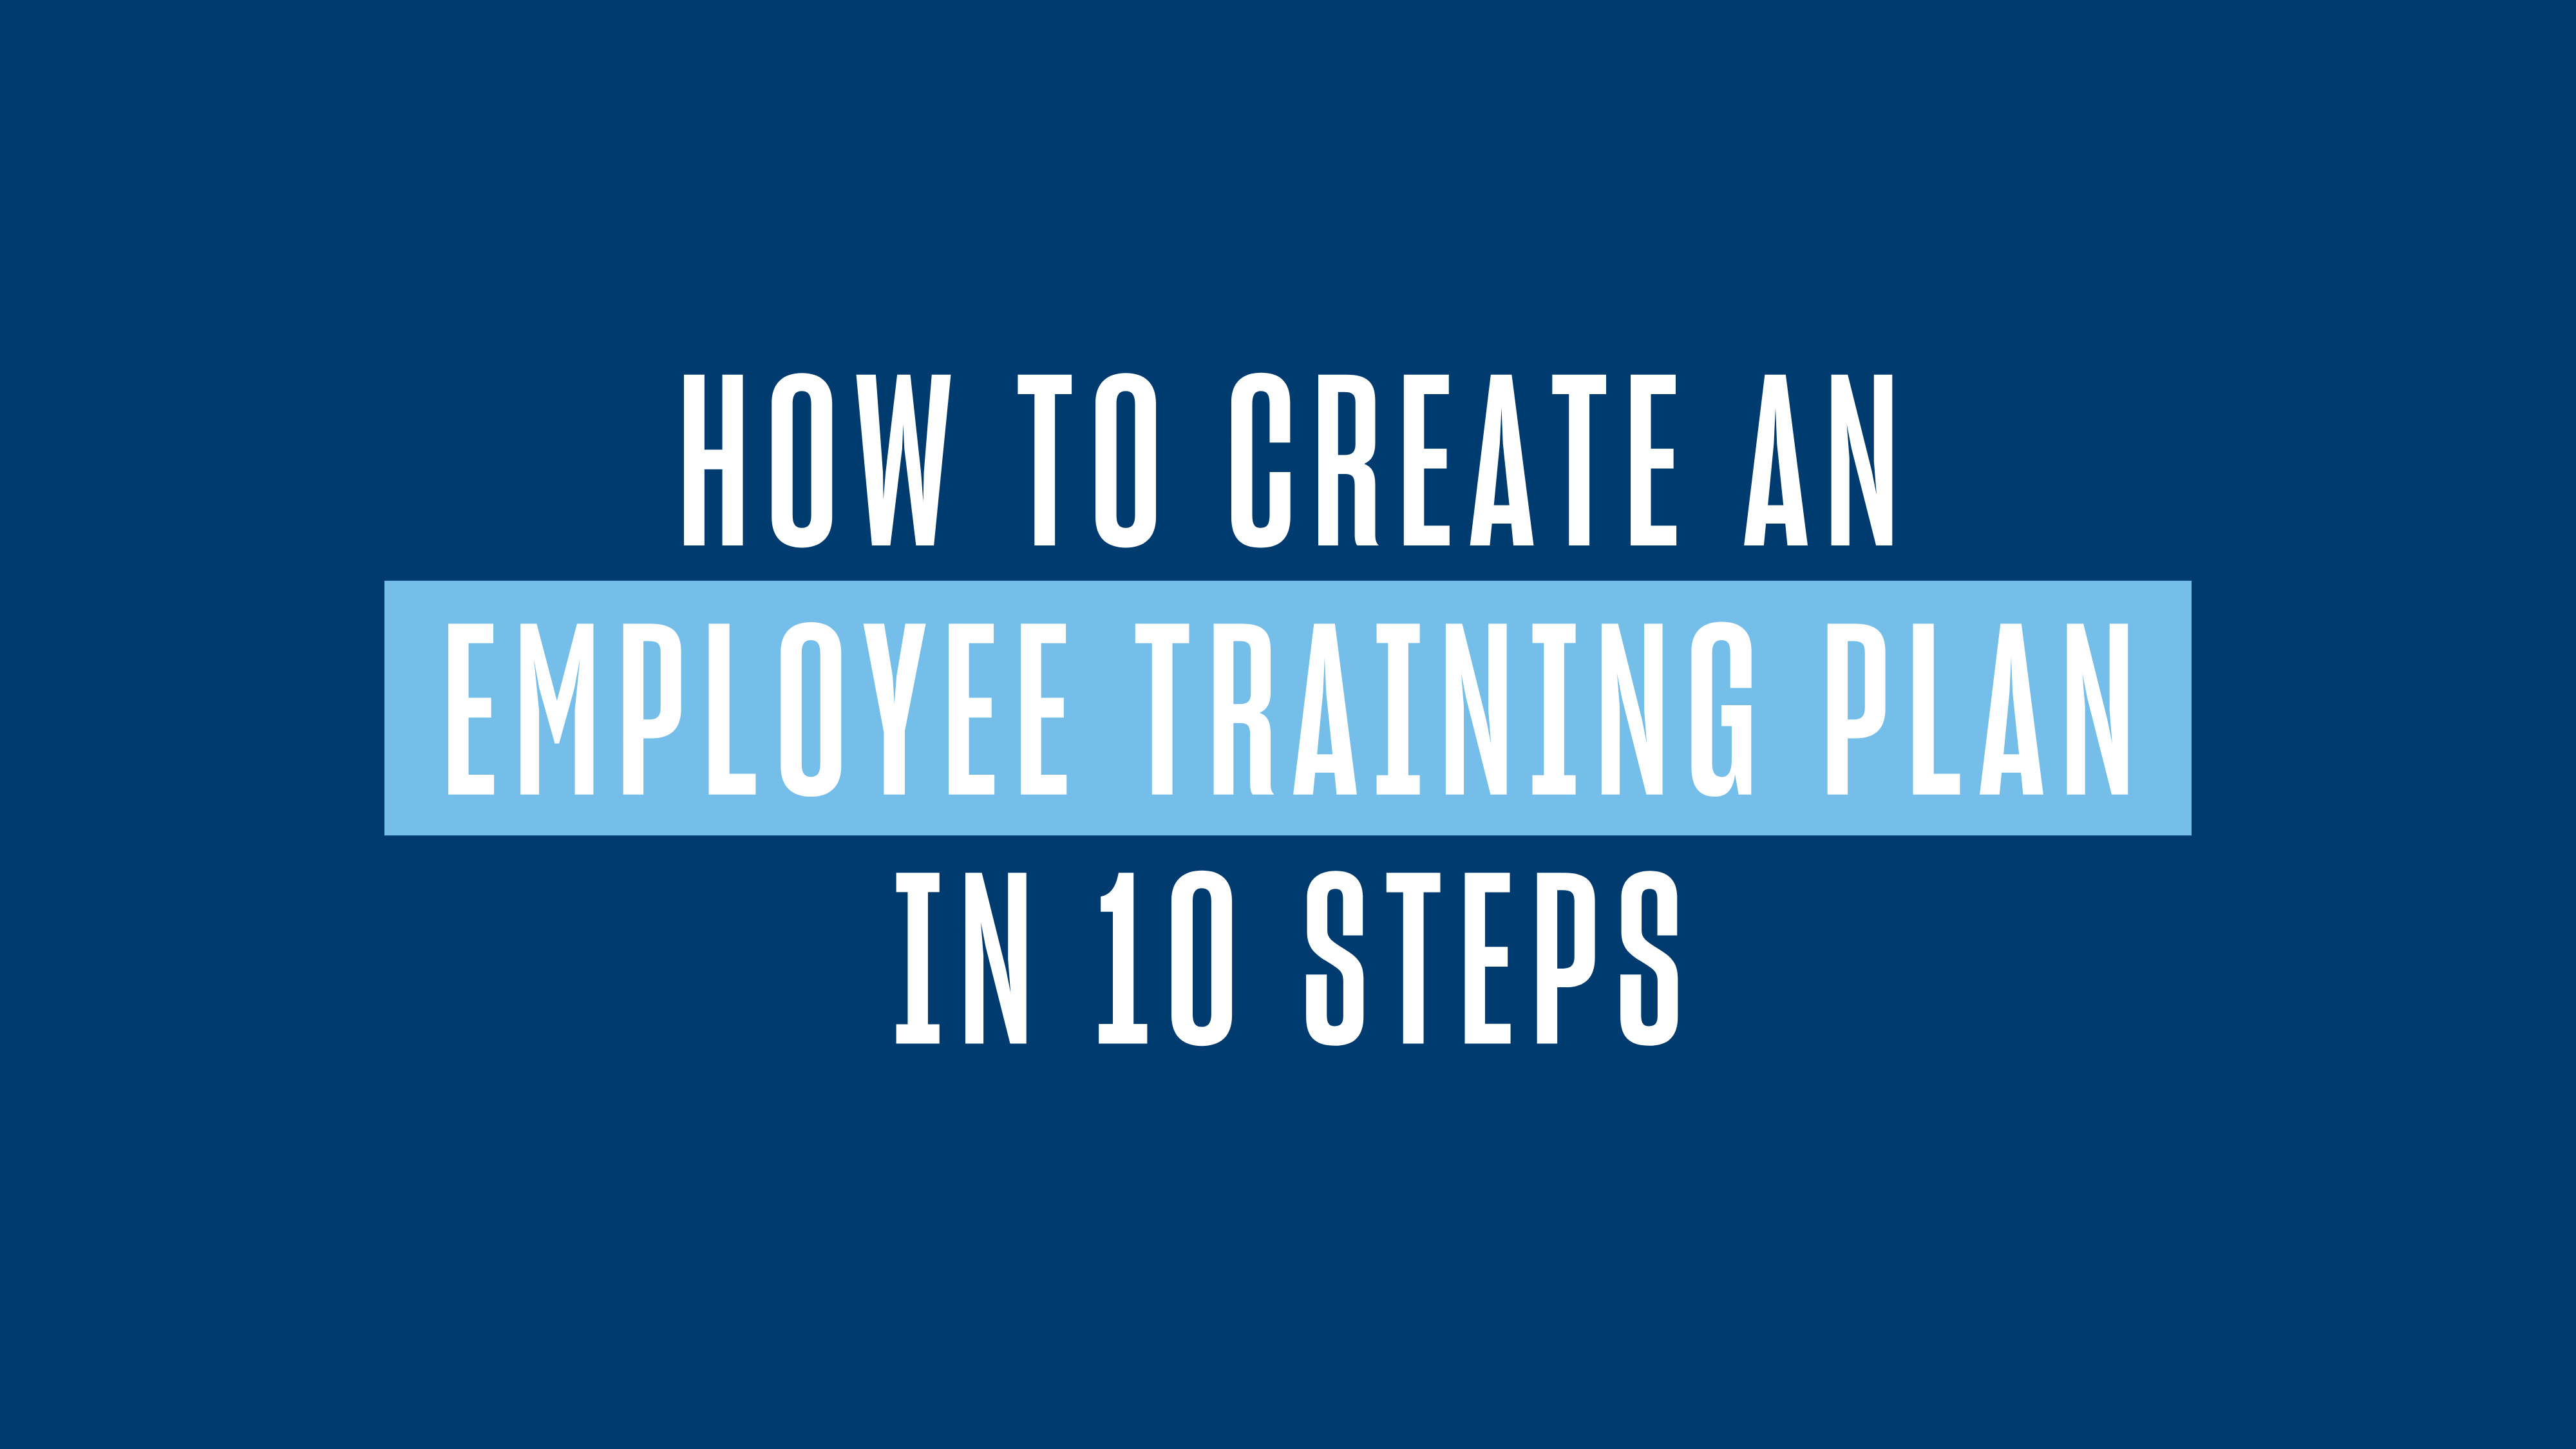 How to Create an Employee Training Plan in 10 Steps